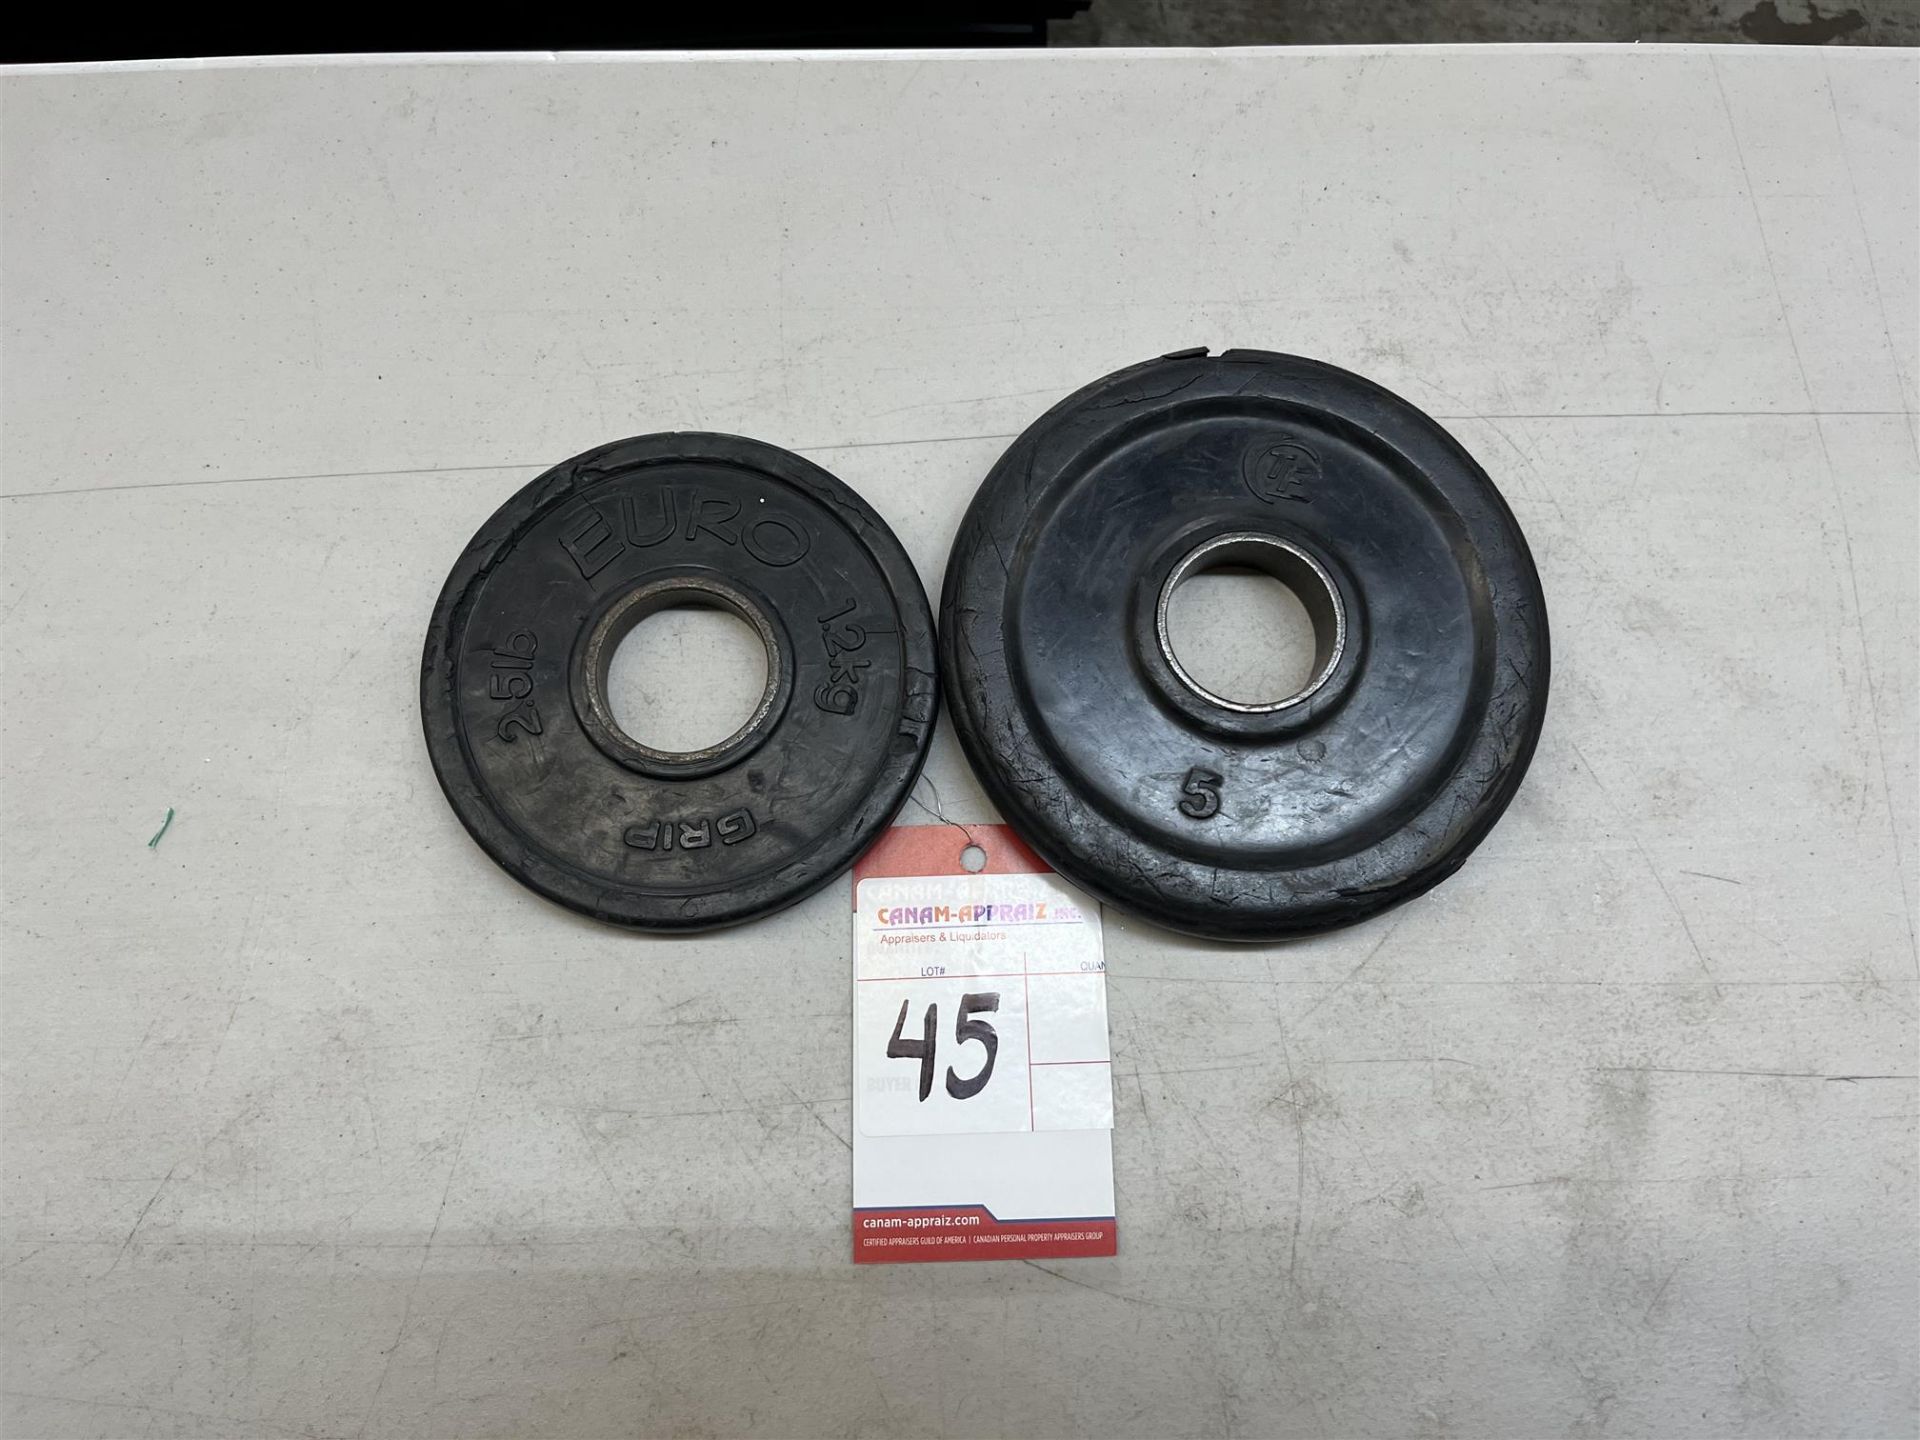 Mix lot of Rubber Plates